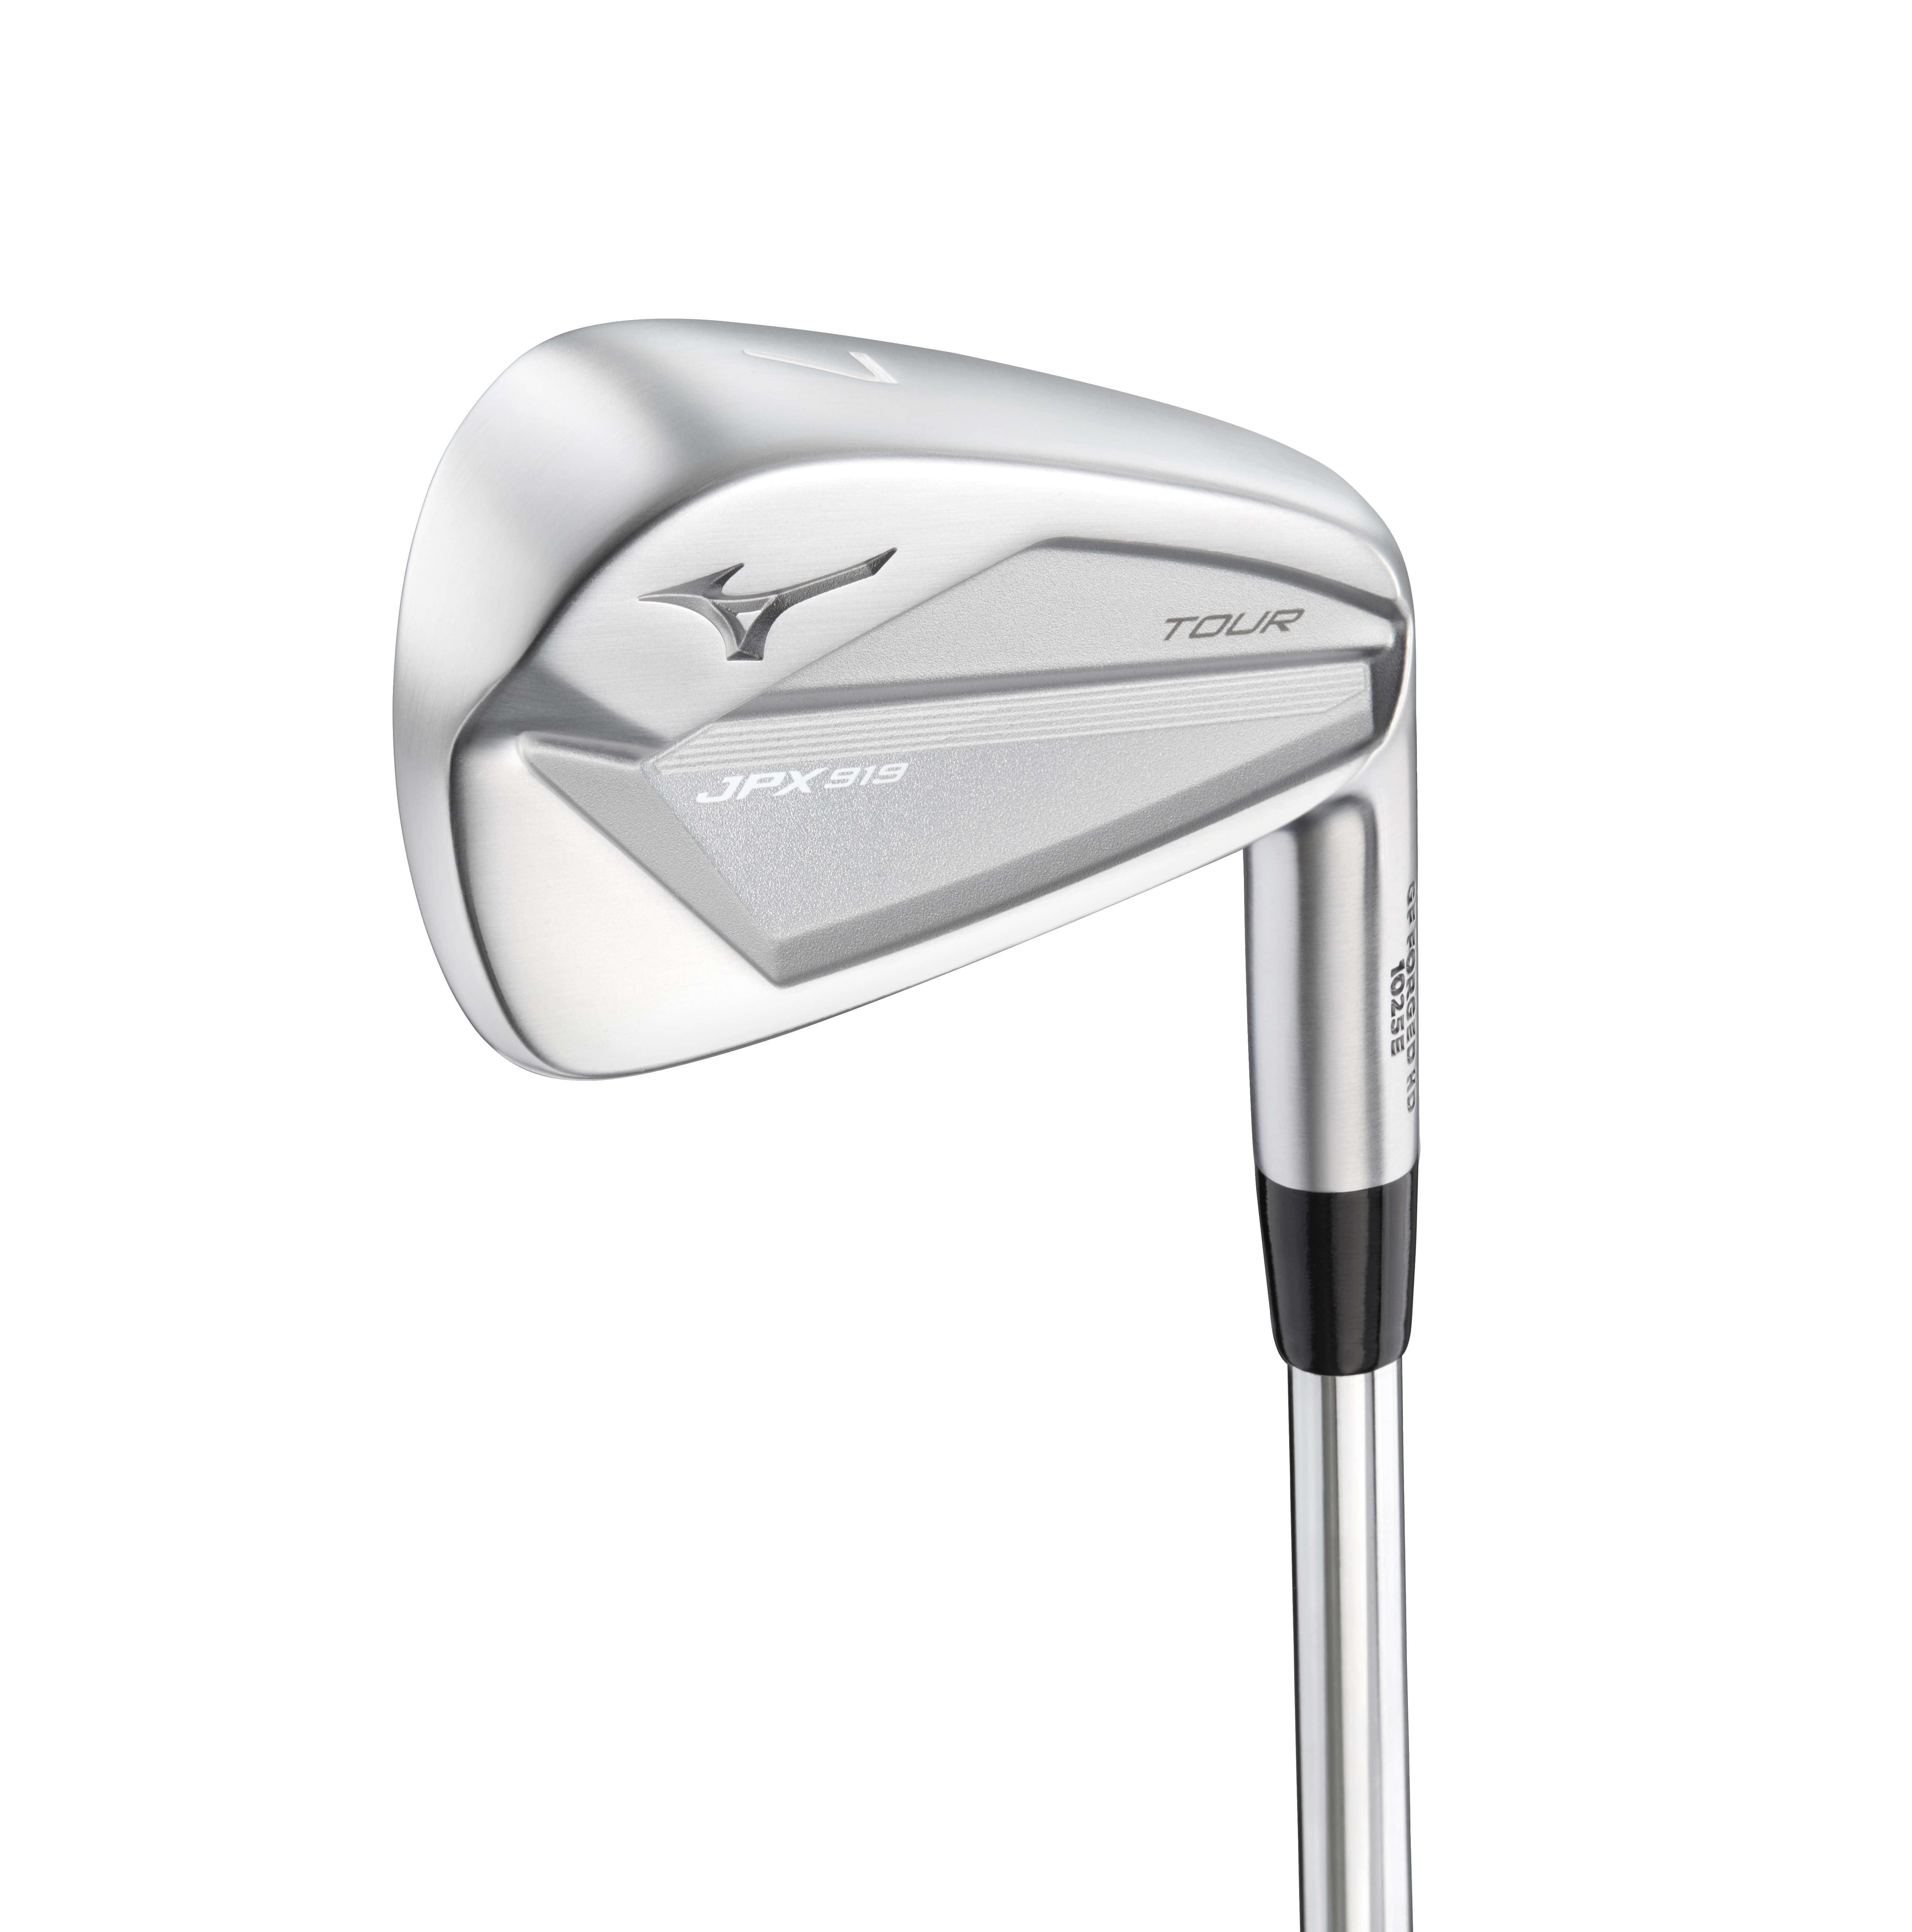 Mizuno JPX919 iron series finds new distance, feel and forgiveness in new metals and manufacturing Golf Equipment Clubs, Balls, Bags Golf Digest